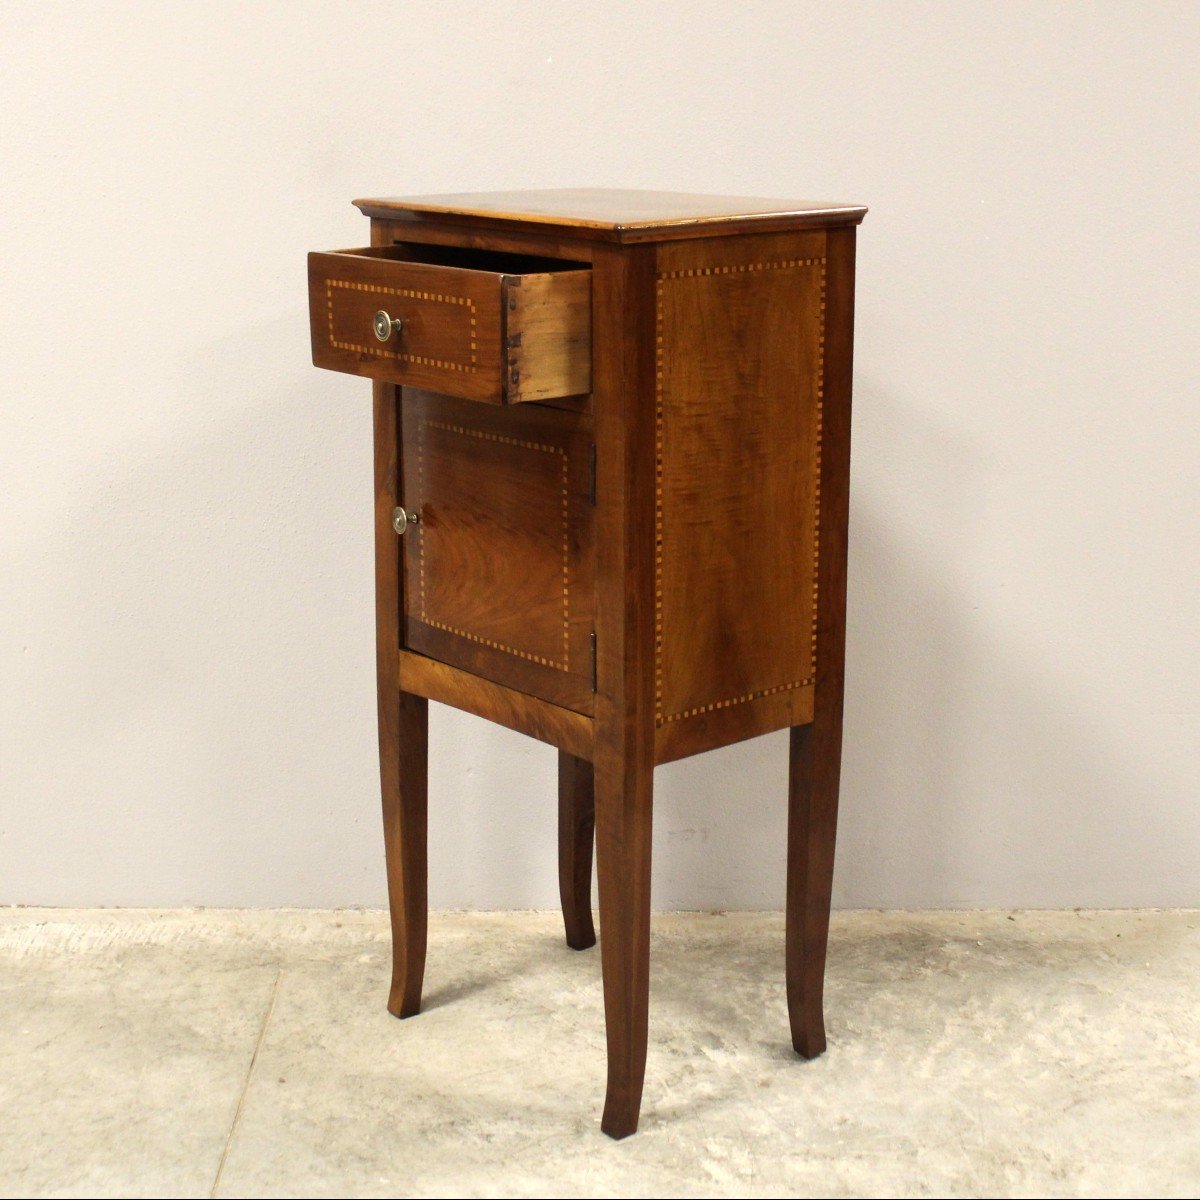 Antique Directoire Bedside Nightstand Table In Walnut And Marquetry - Italy 19th-photo-2